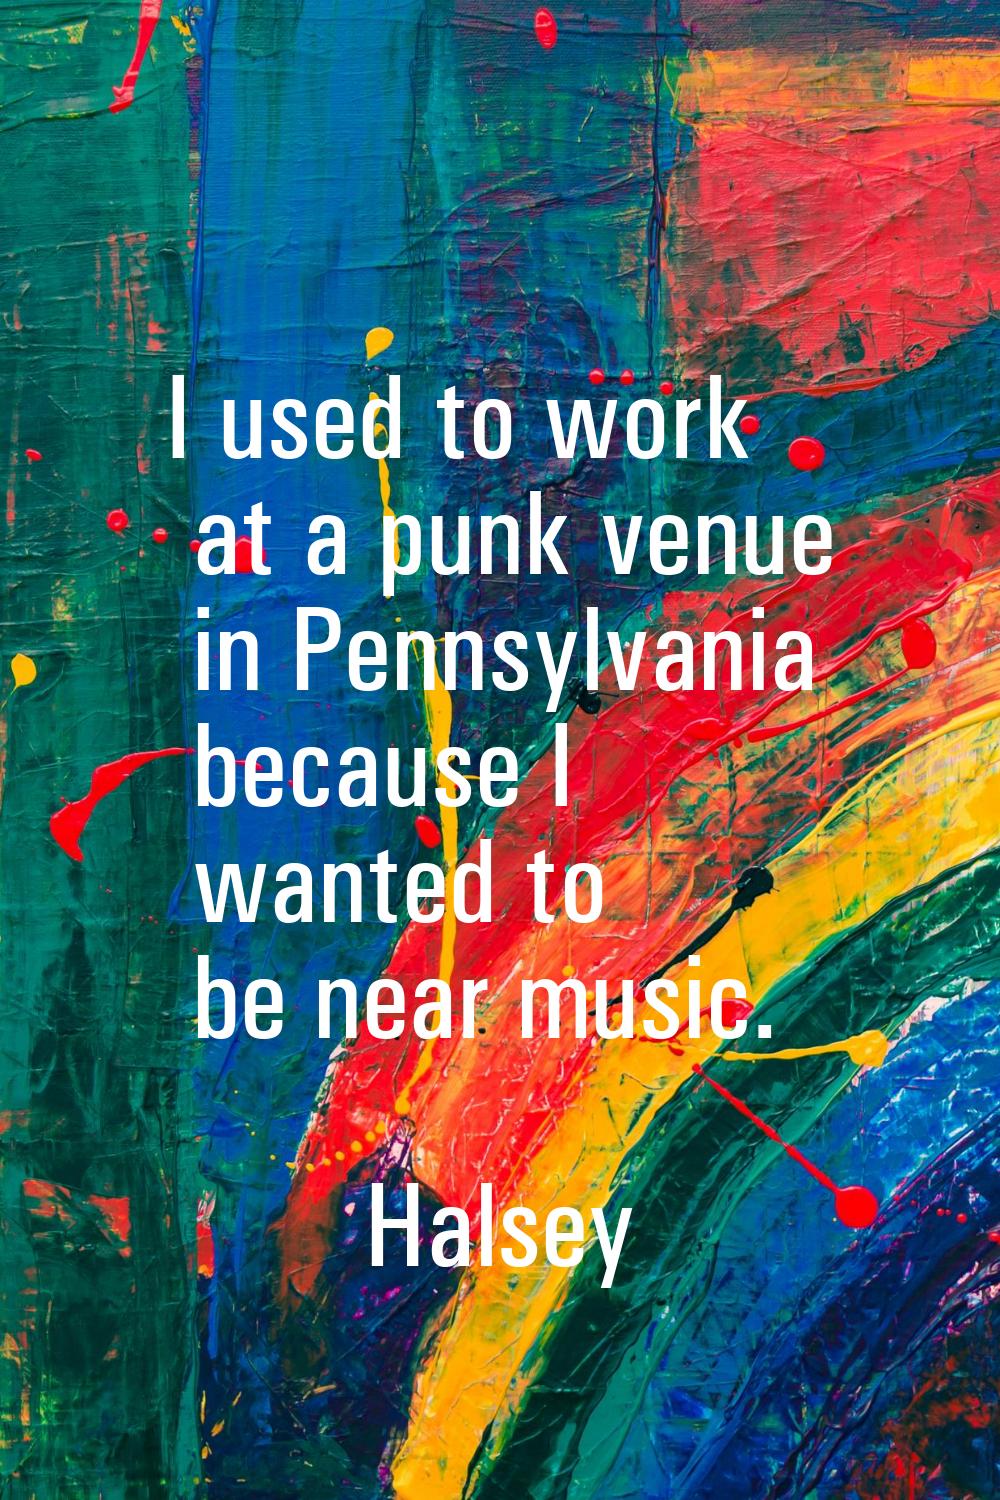 I used to work at a punk venue in Pennsylvania because I wanted to be near music.